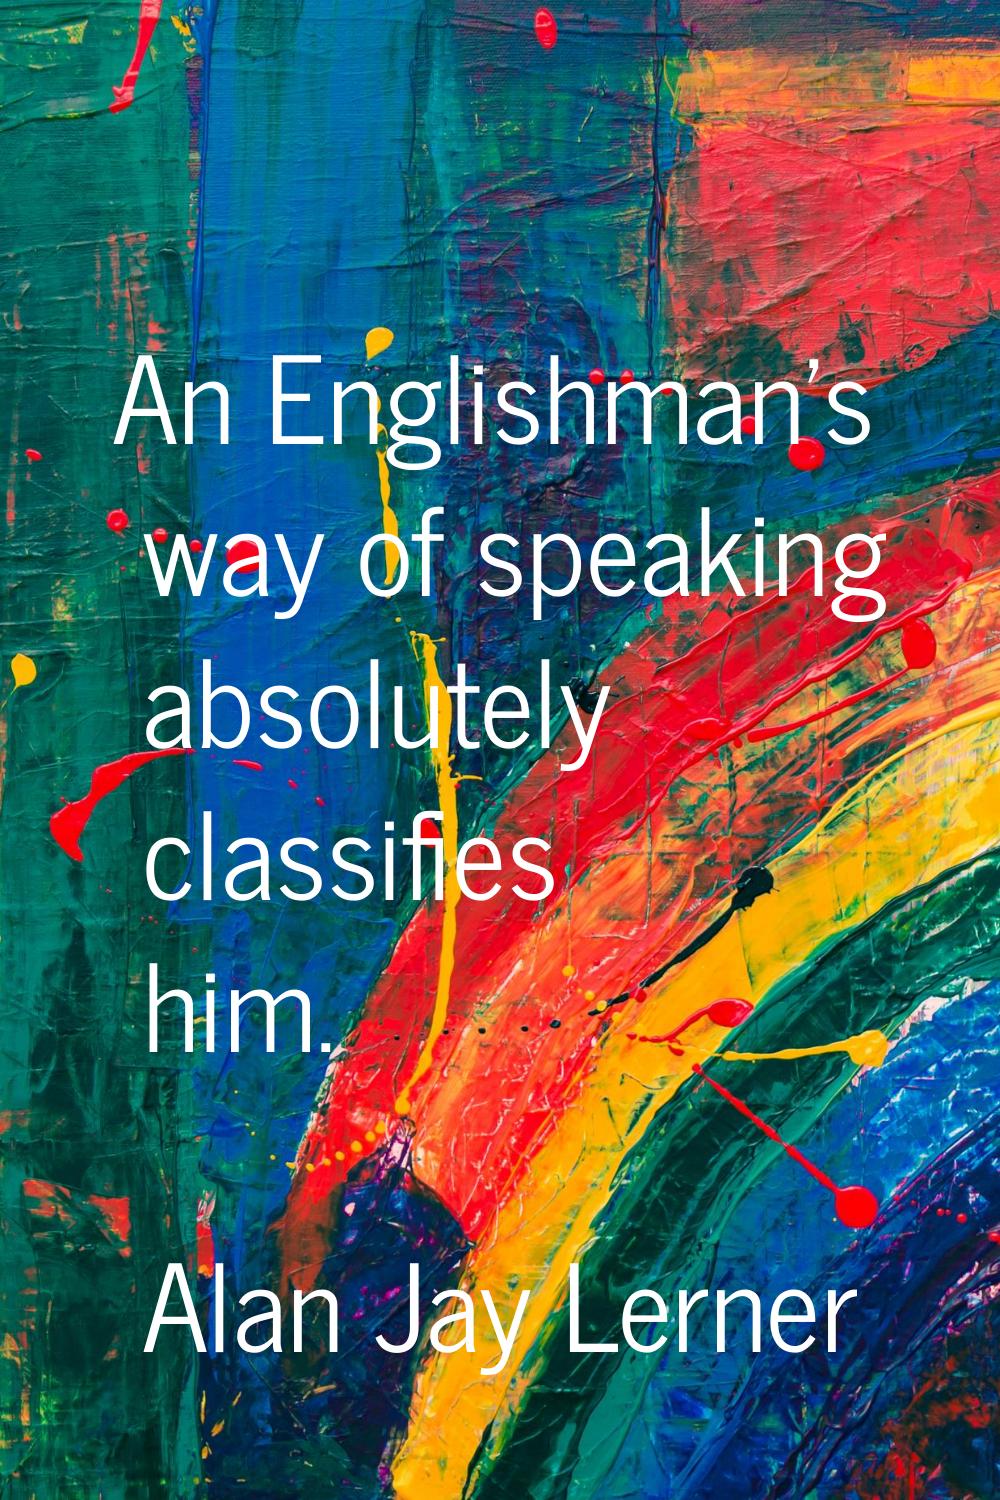 An Englishman's way of speaking absolutely classifies him.